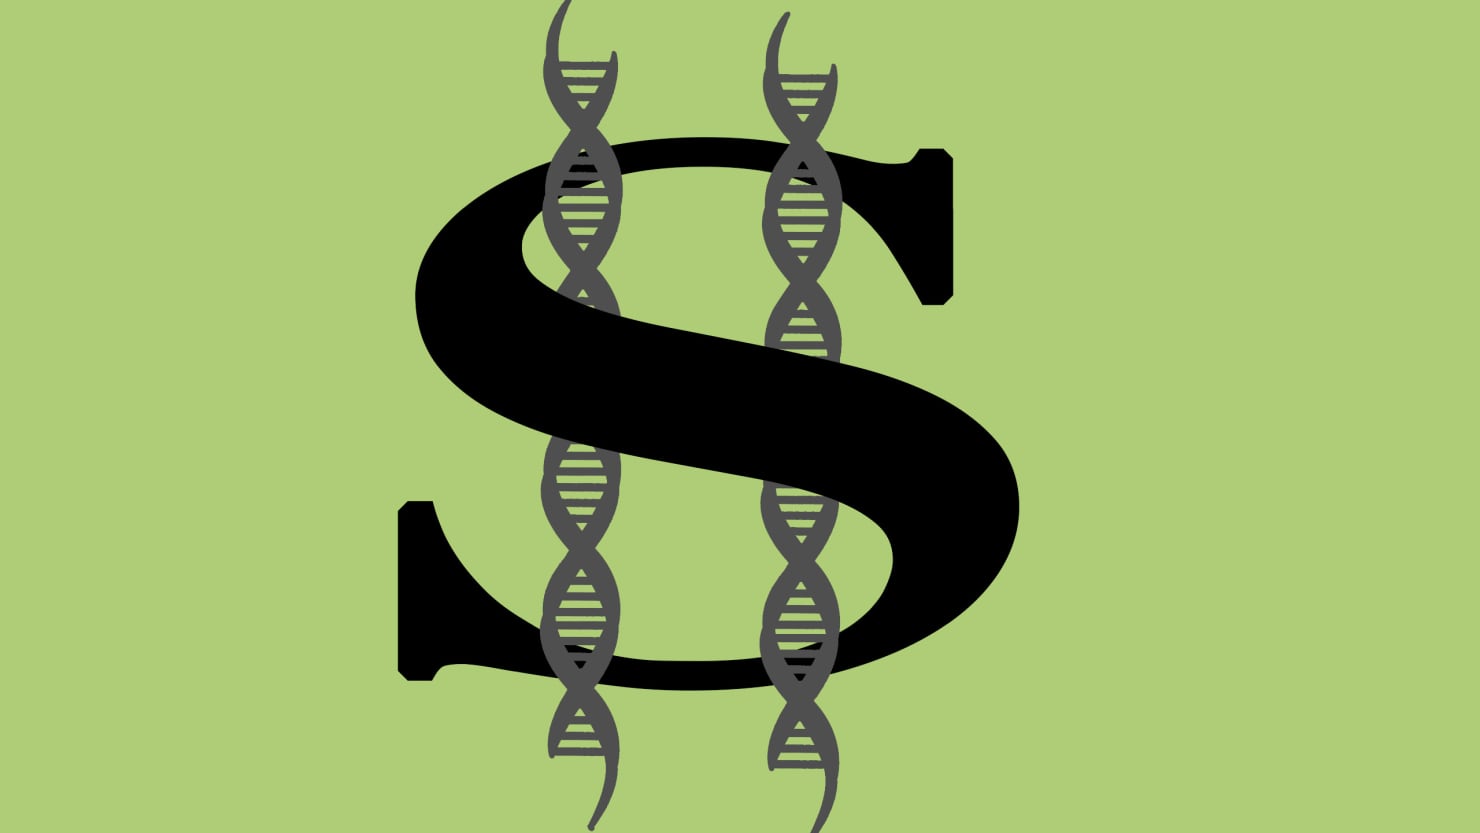 Startup Wants to Sell Your DNA for Cryptocurrency | The Daily Beast